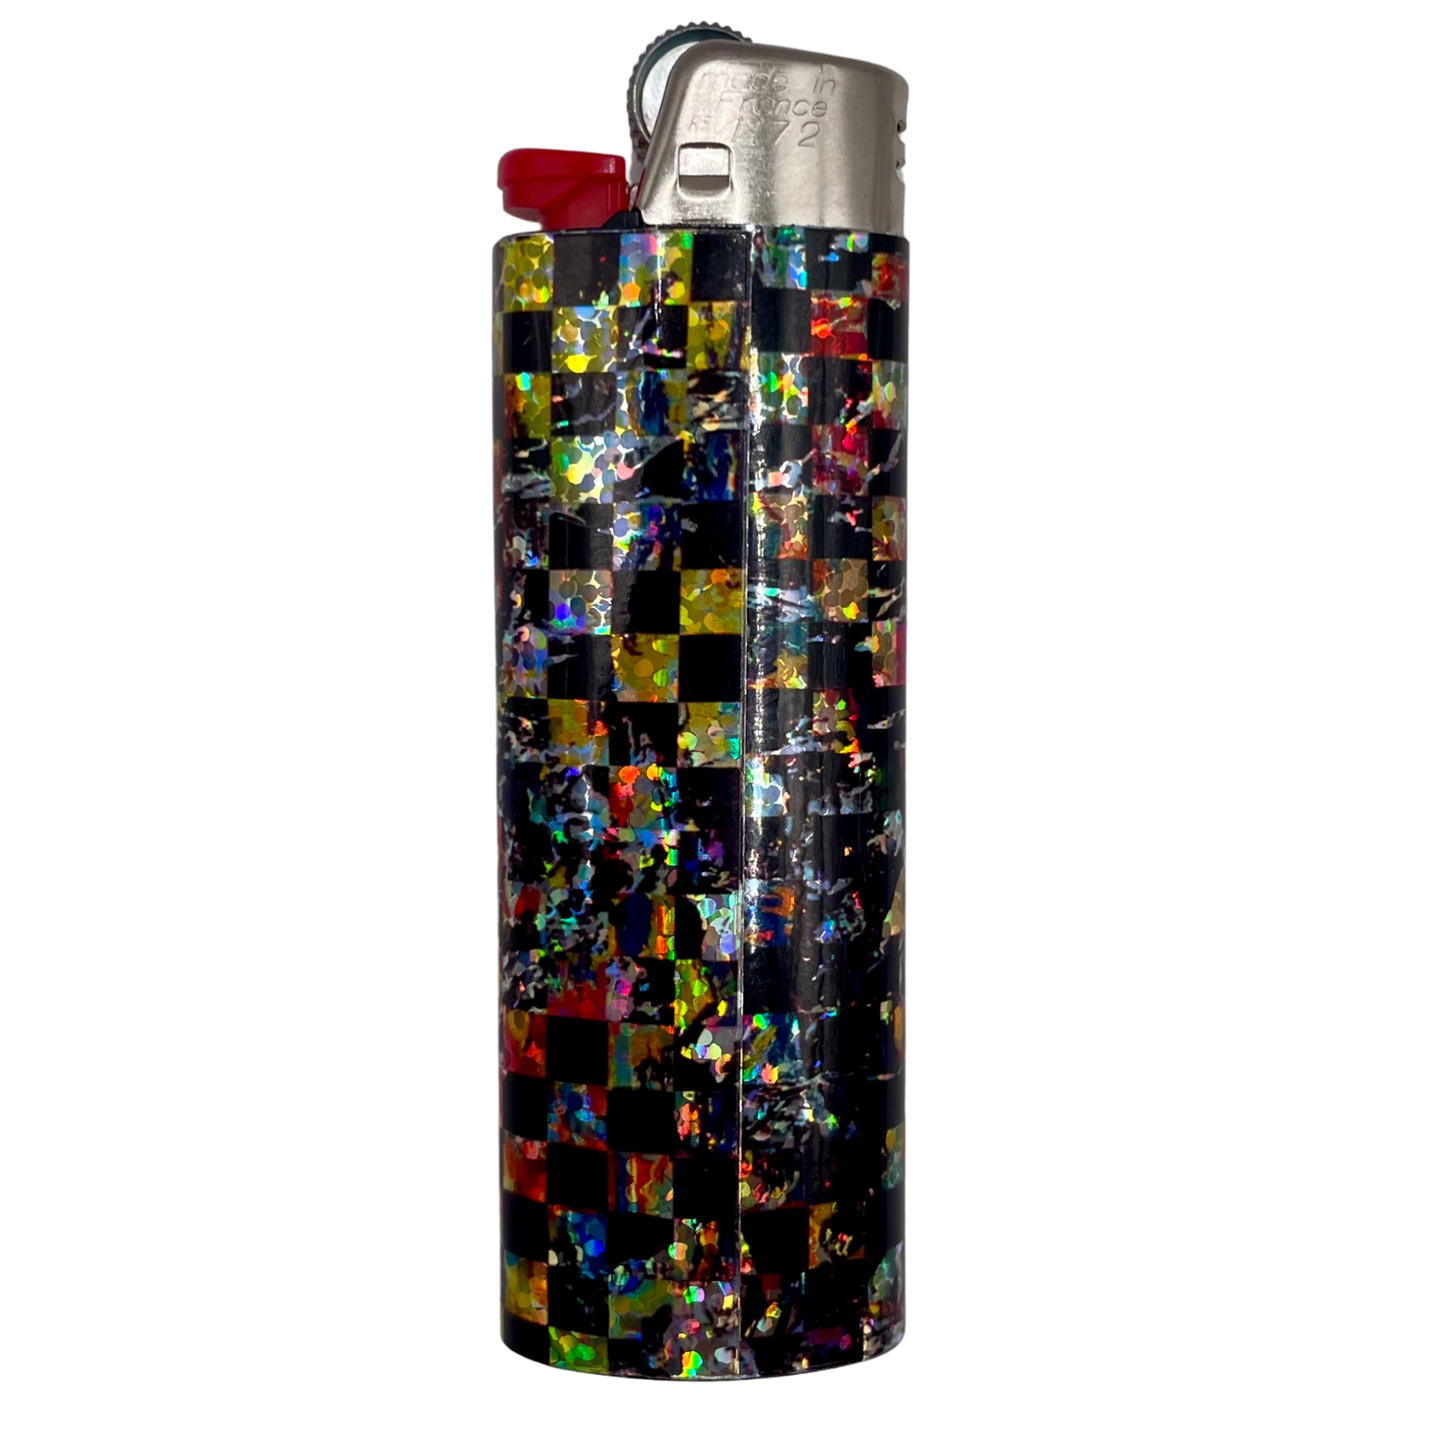 COORDINATED CHAOS HOLO LIGHTER